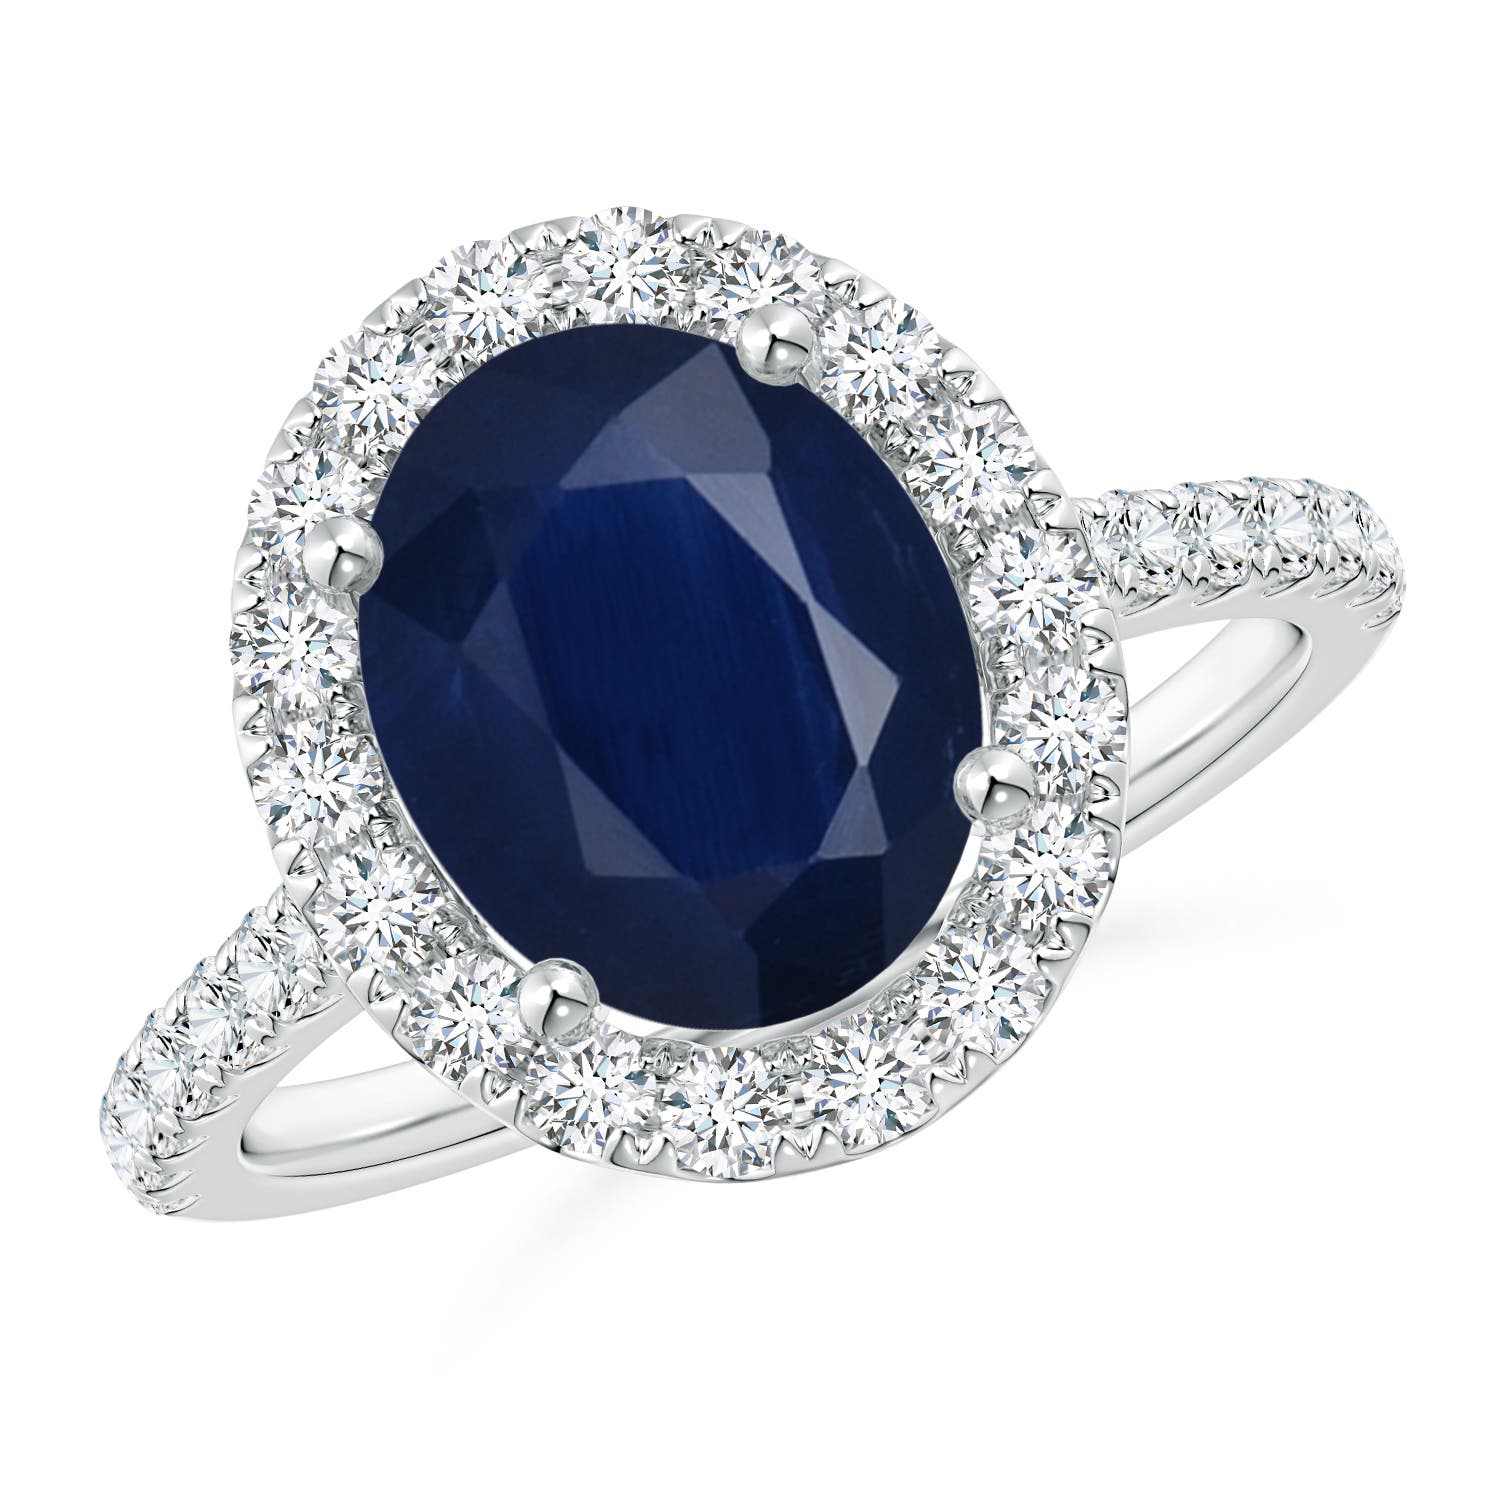 It's a Match! 10 Engagement and Wedding Ring Combinations You'll Love